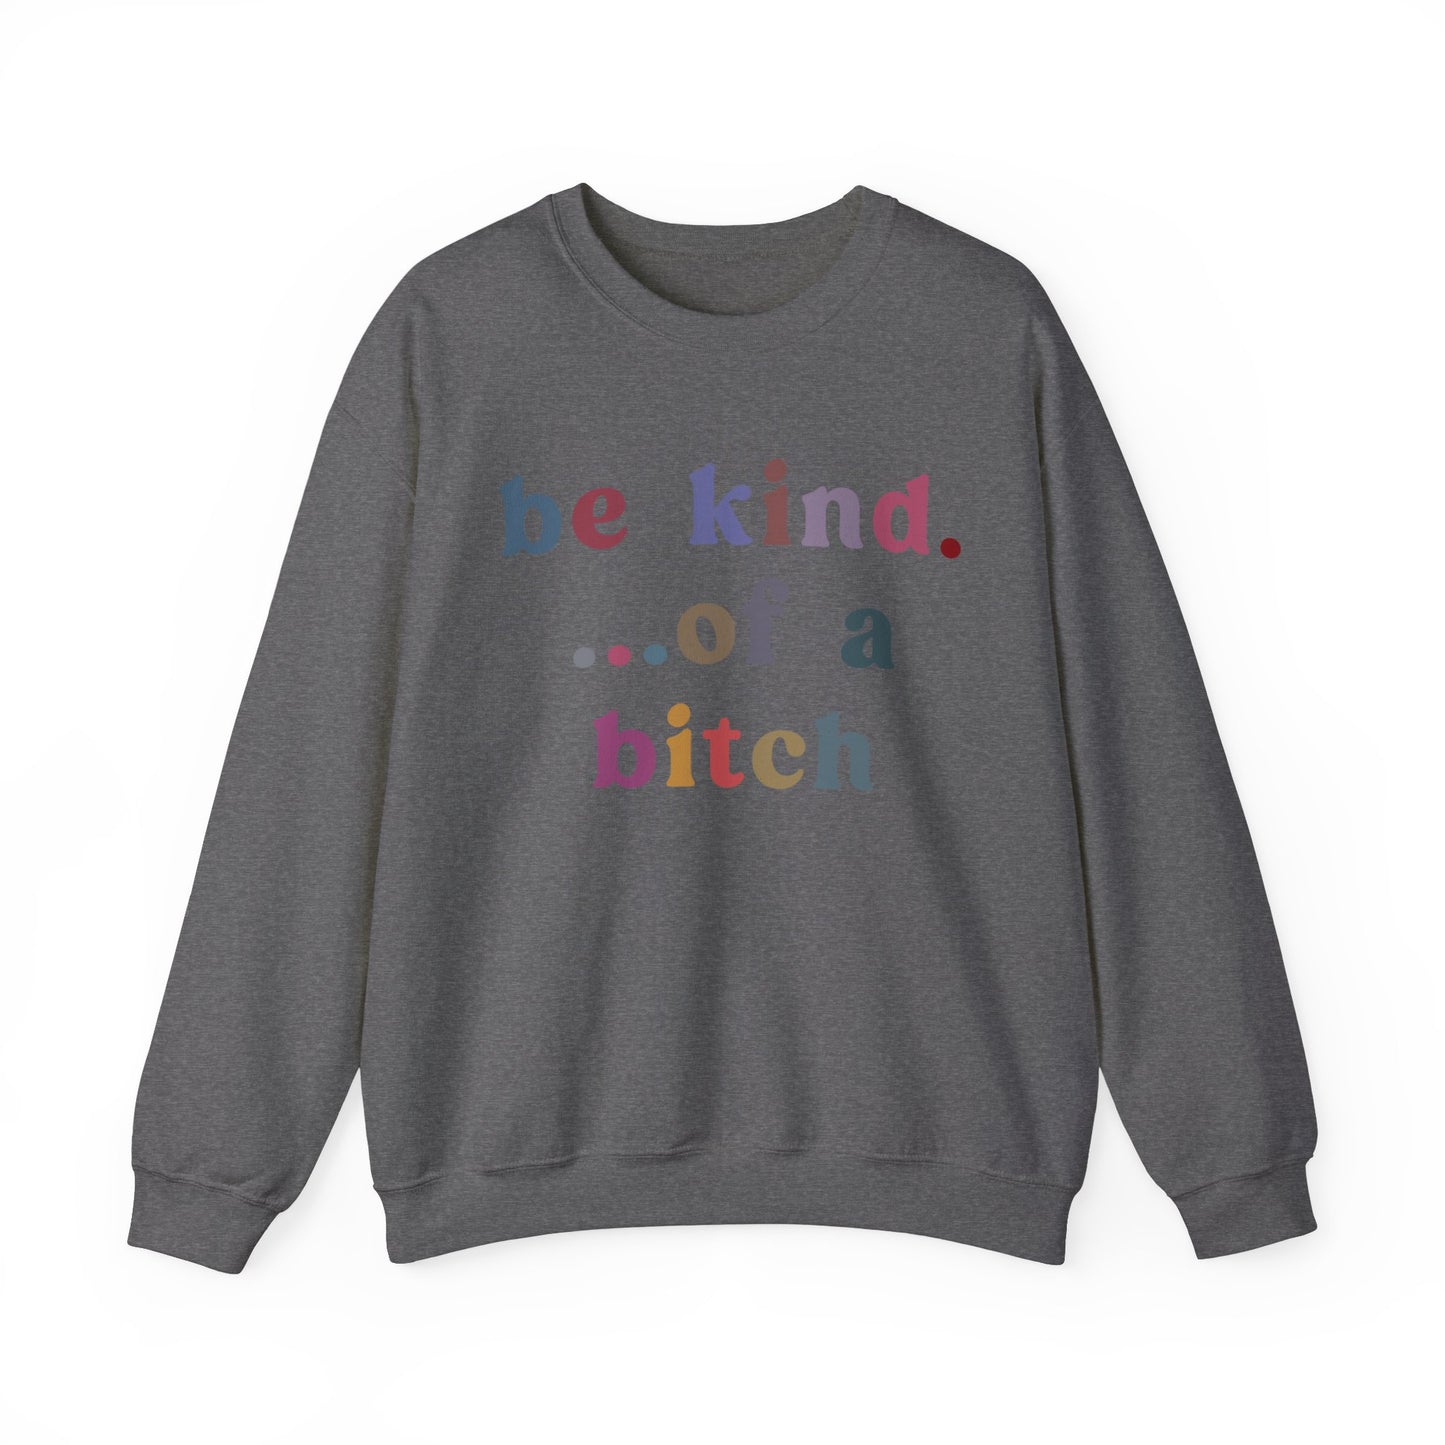 Be Kind Of A Bitch Sweatshirt, Funny Girls Sweatshirt, Funny Sassy Sweatshirt, Sarcasm Sweatshirt for Women, Funny Gift for Friends, S1199